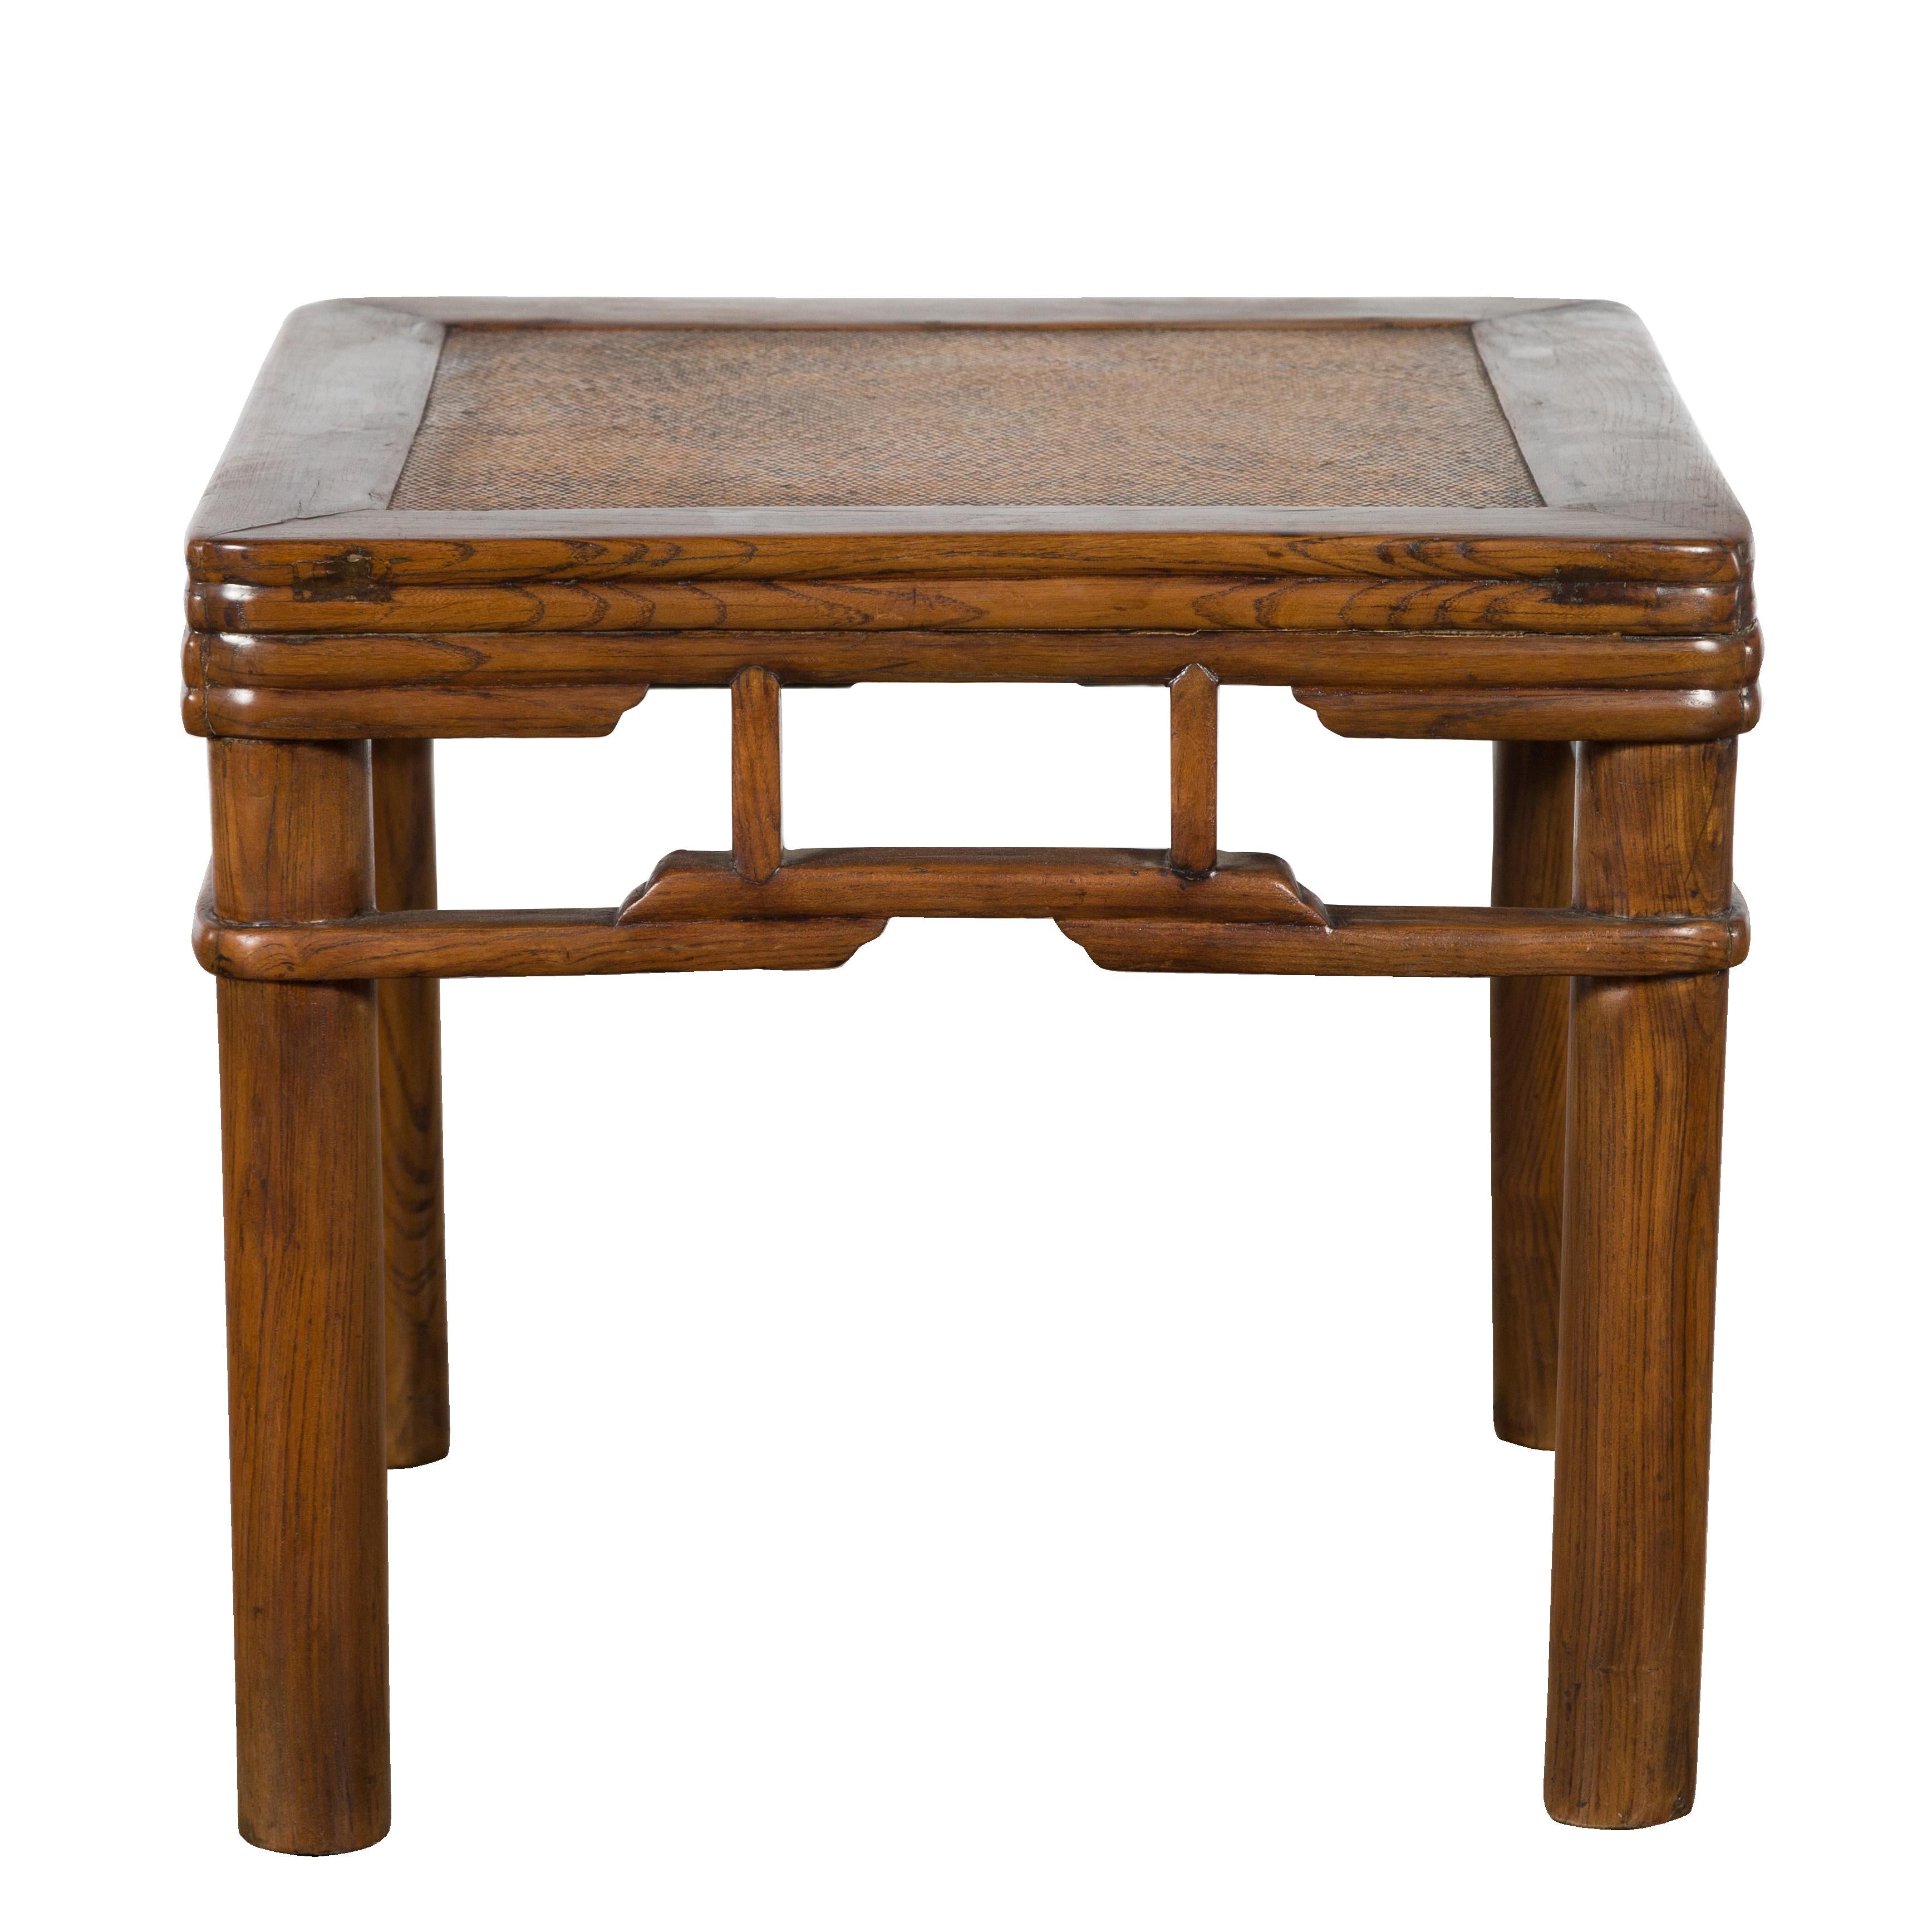 Chinese Qing Dynasty Early 20th Century Elmwood Side Table with Woven Rattan Top For Sale 15